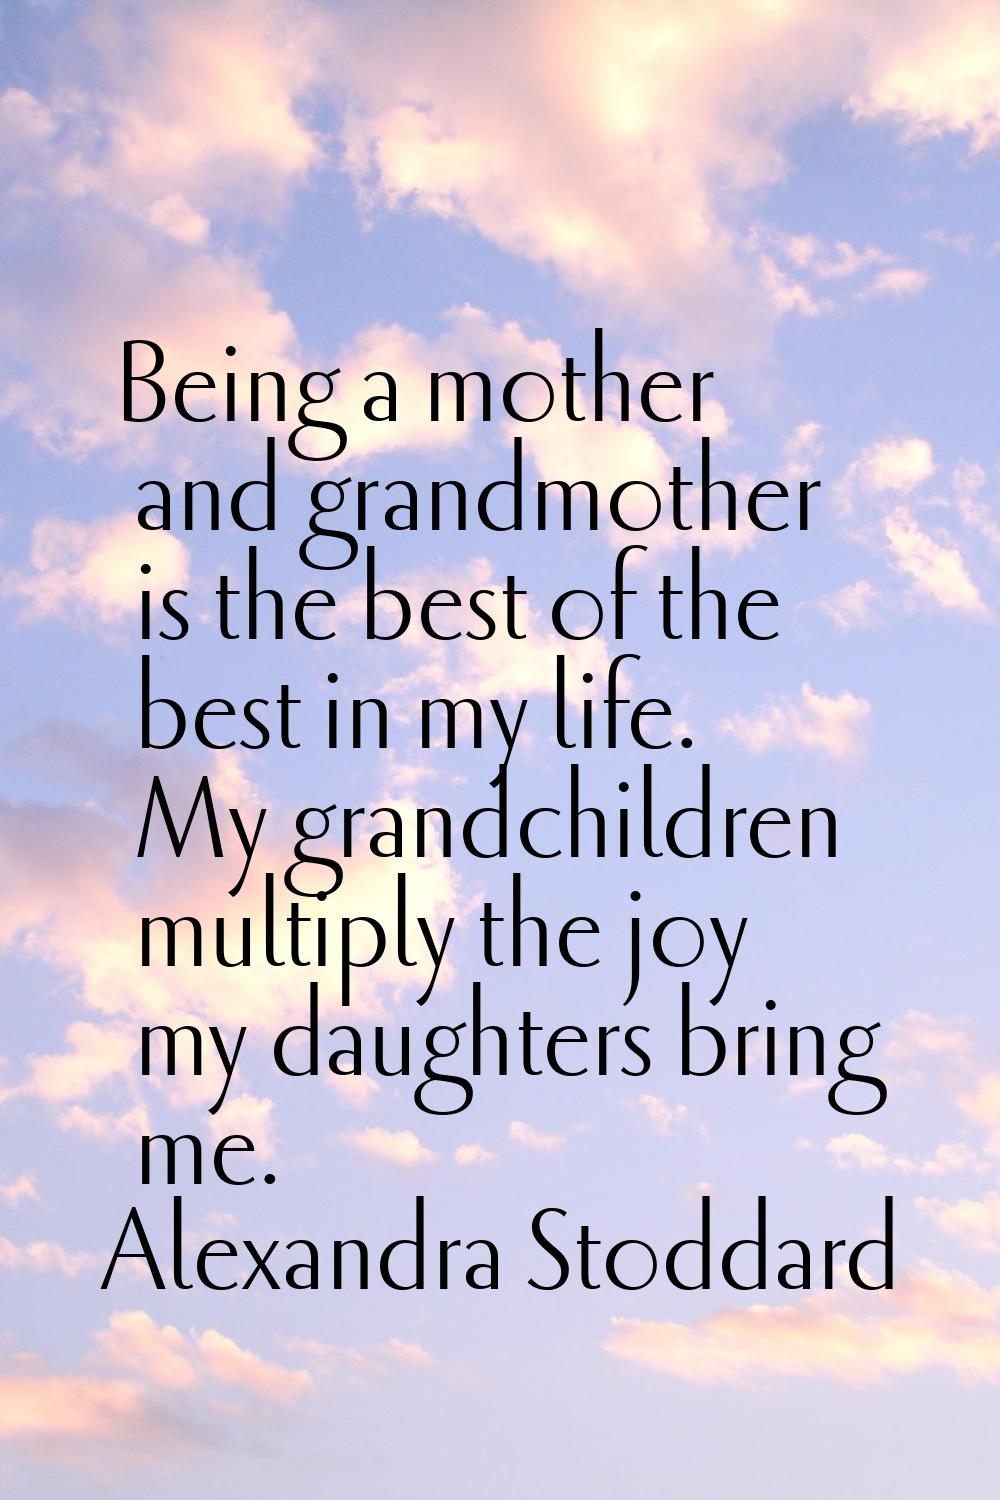 Being a mother and grandmother is the best of the best in my life. My grandchildren multiply the jo